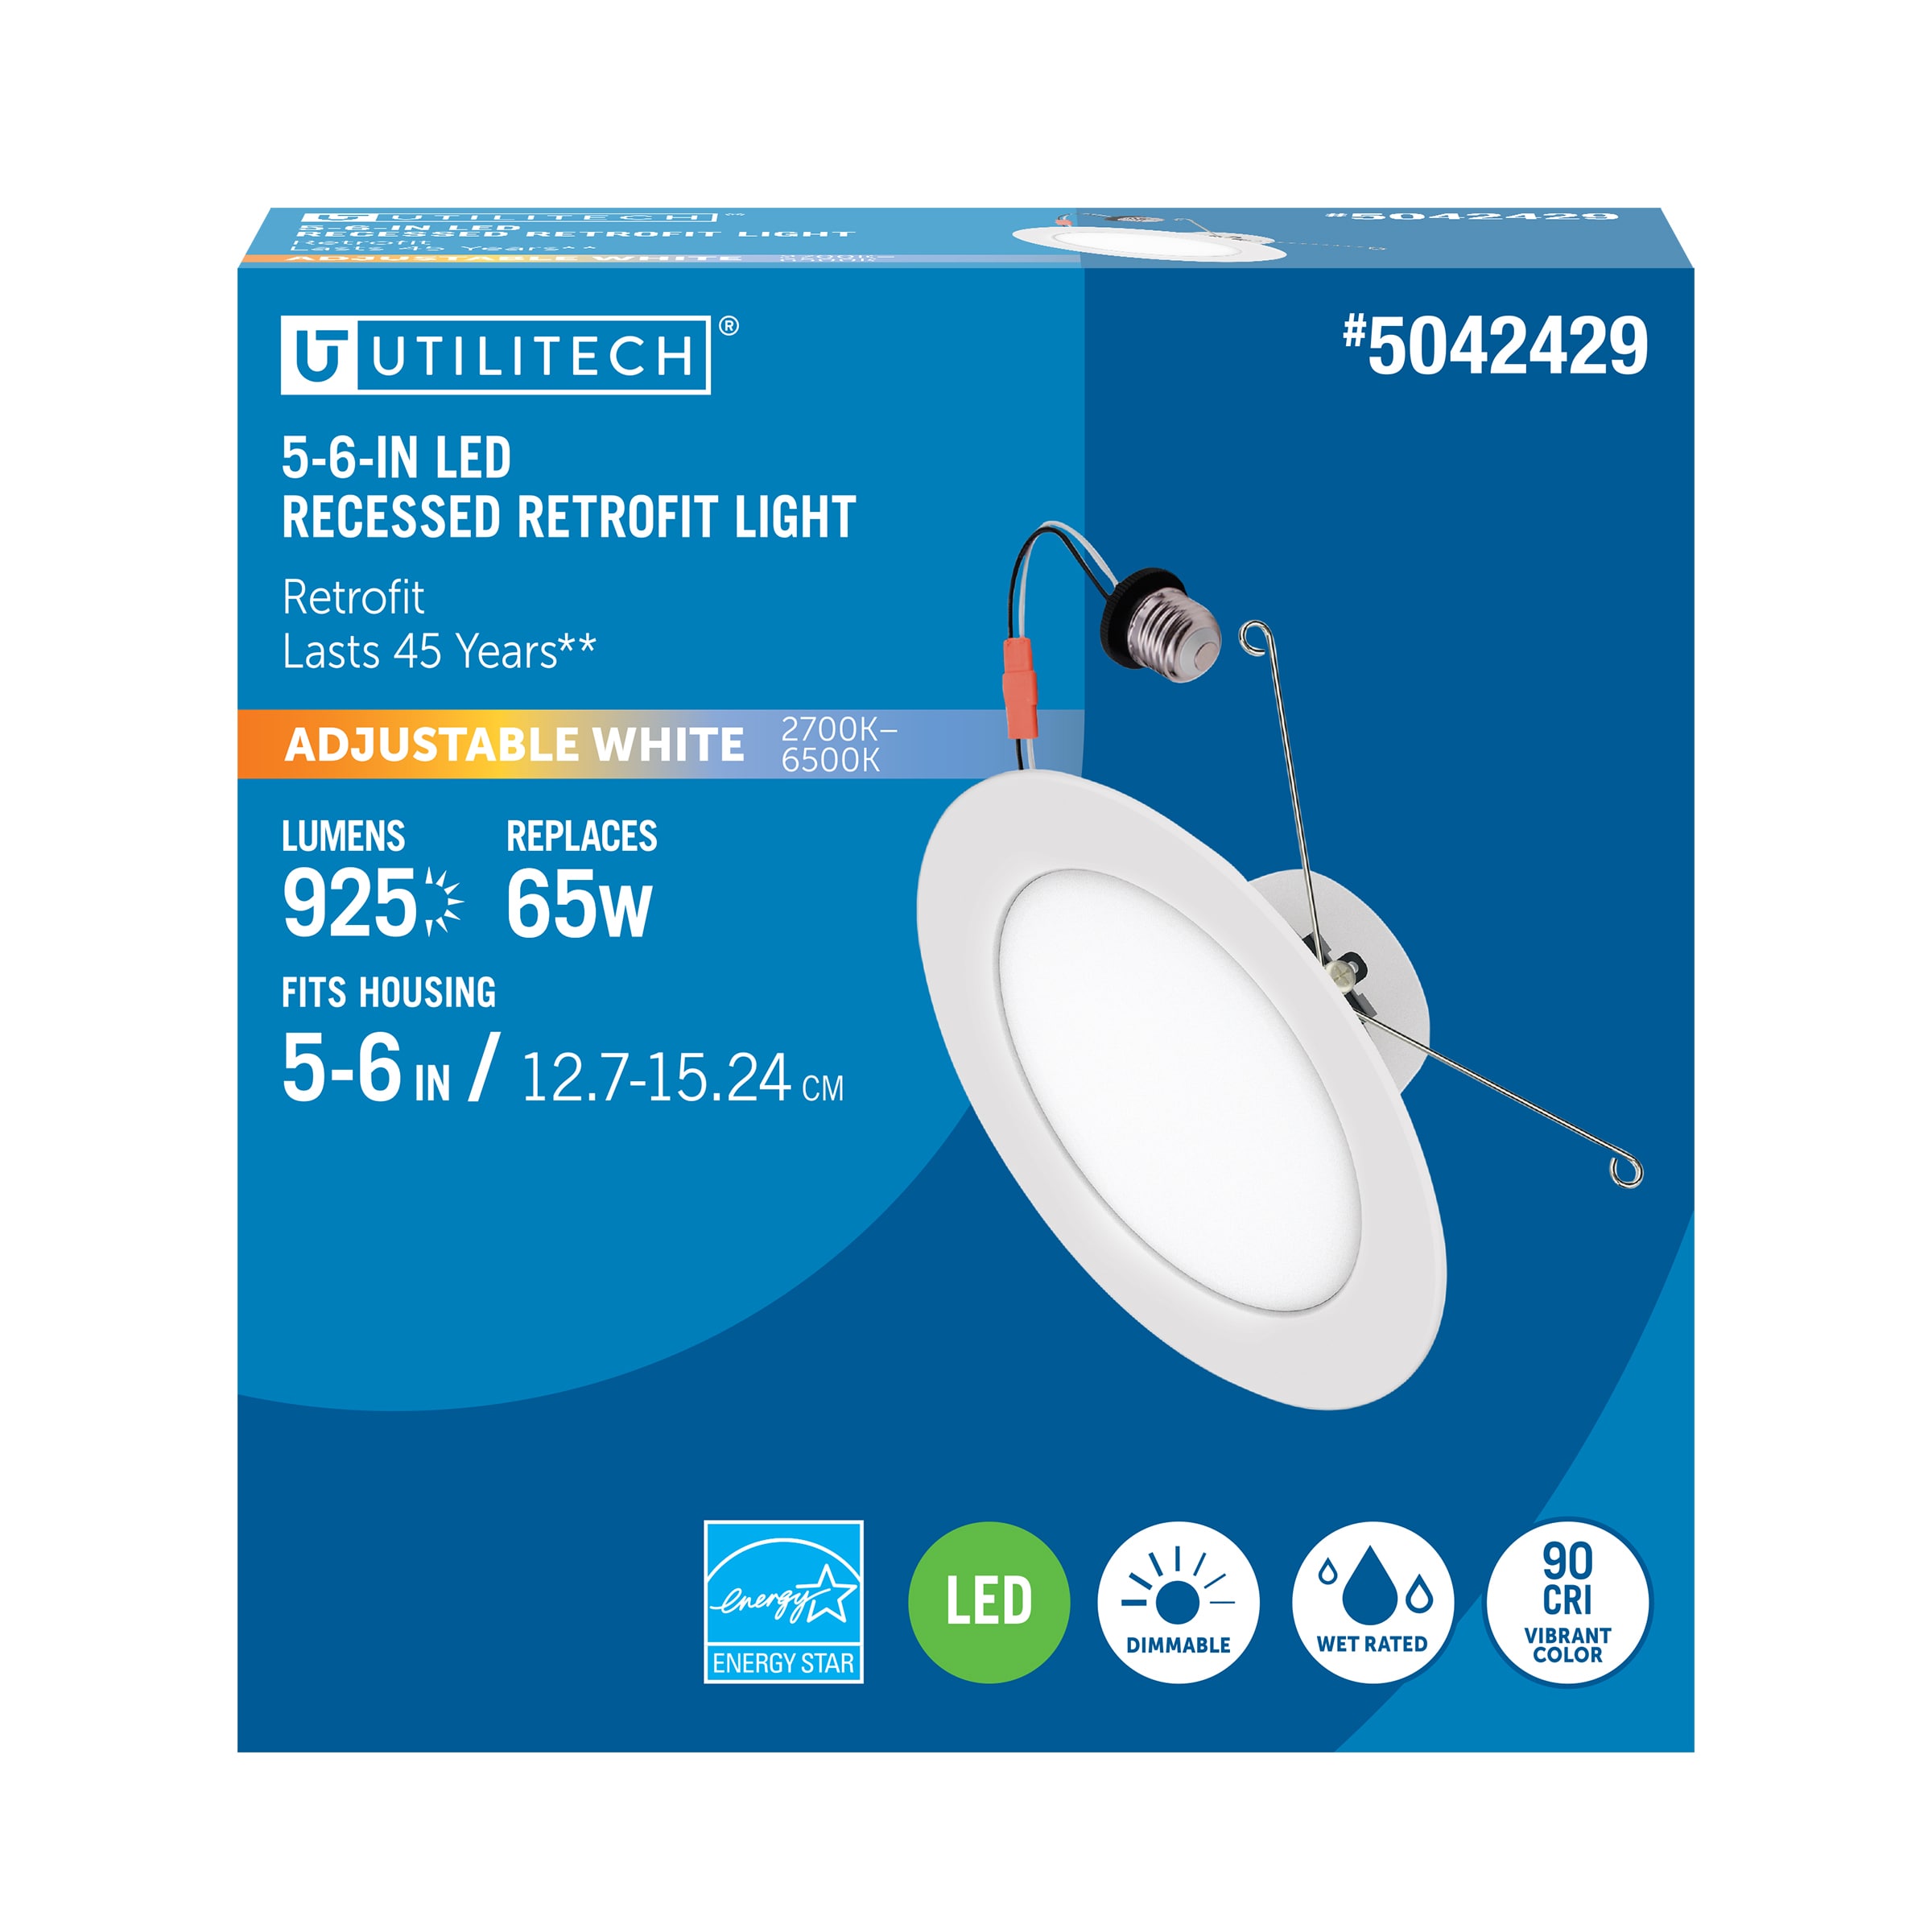 Simply Conserve 5/6 in. Smart Wi-Fi Plus BLE 12-Watt LED Recessed